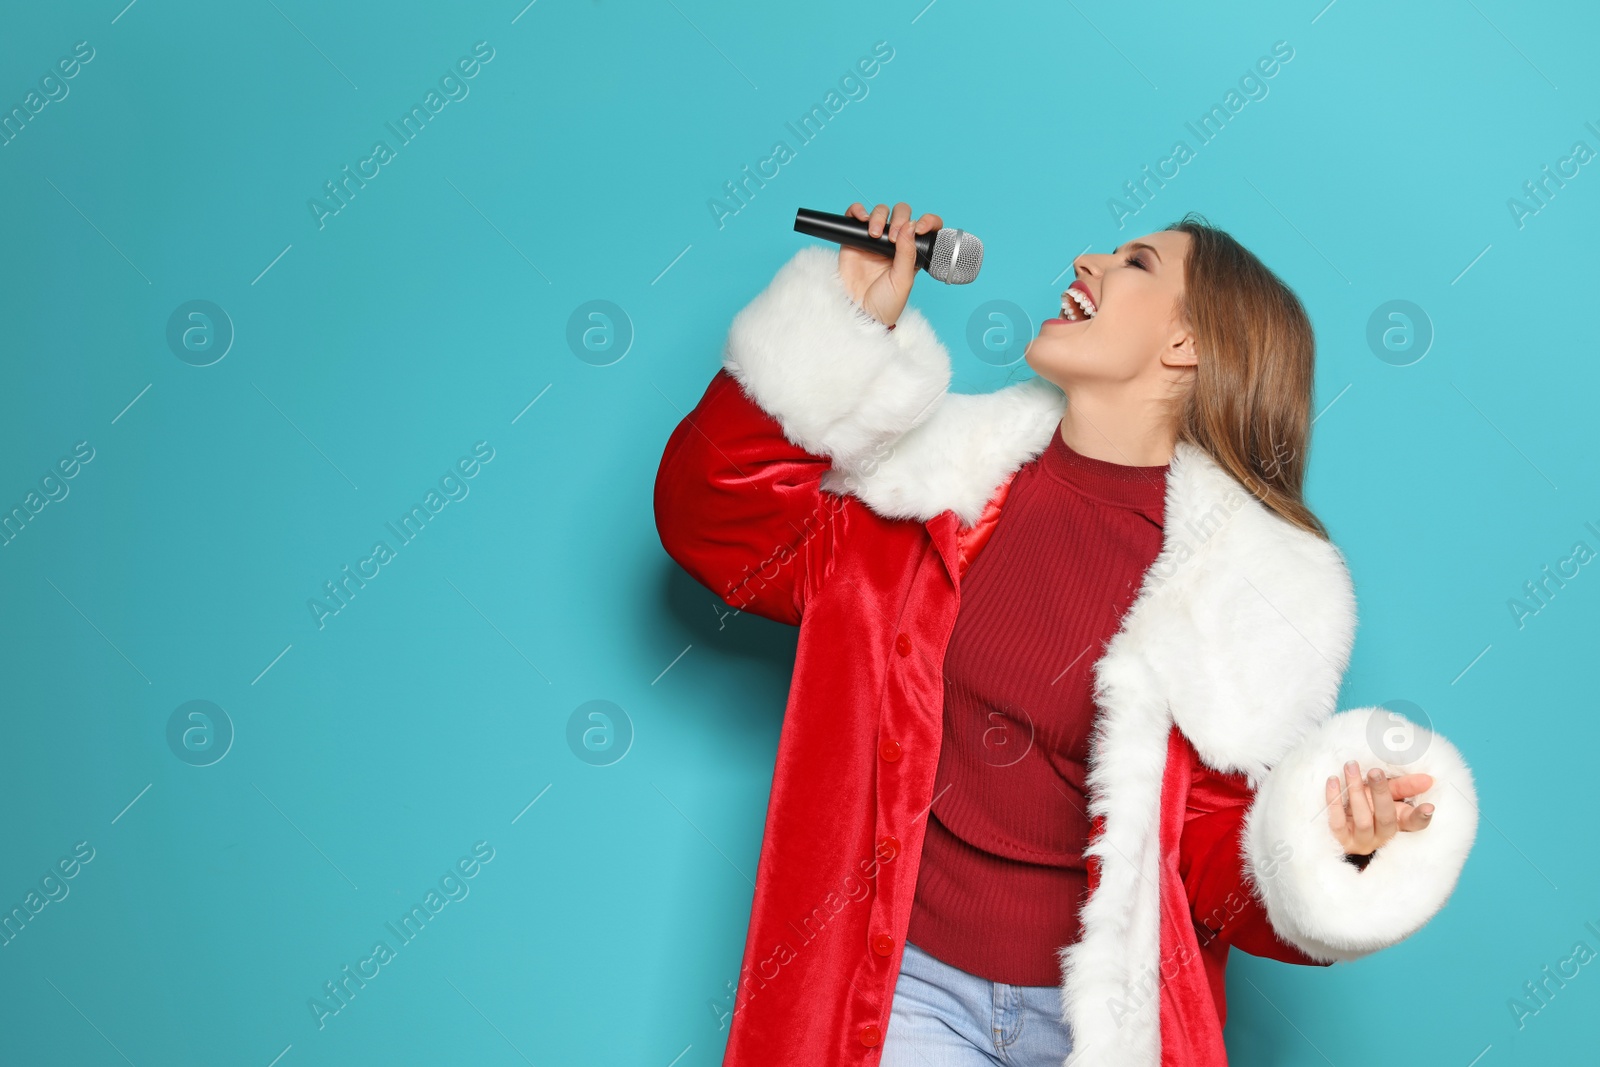 Photo of Young woman in Santa costume singing into microphone on color background. Christmas music